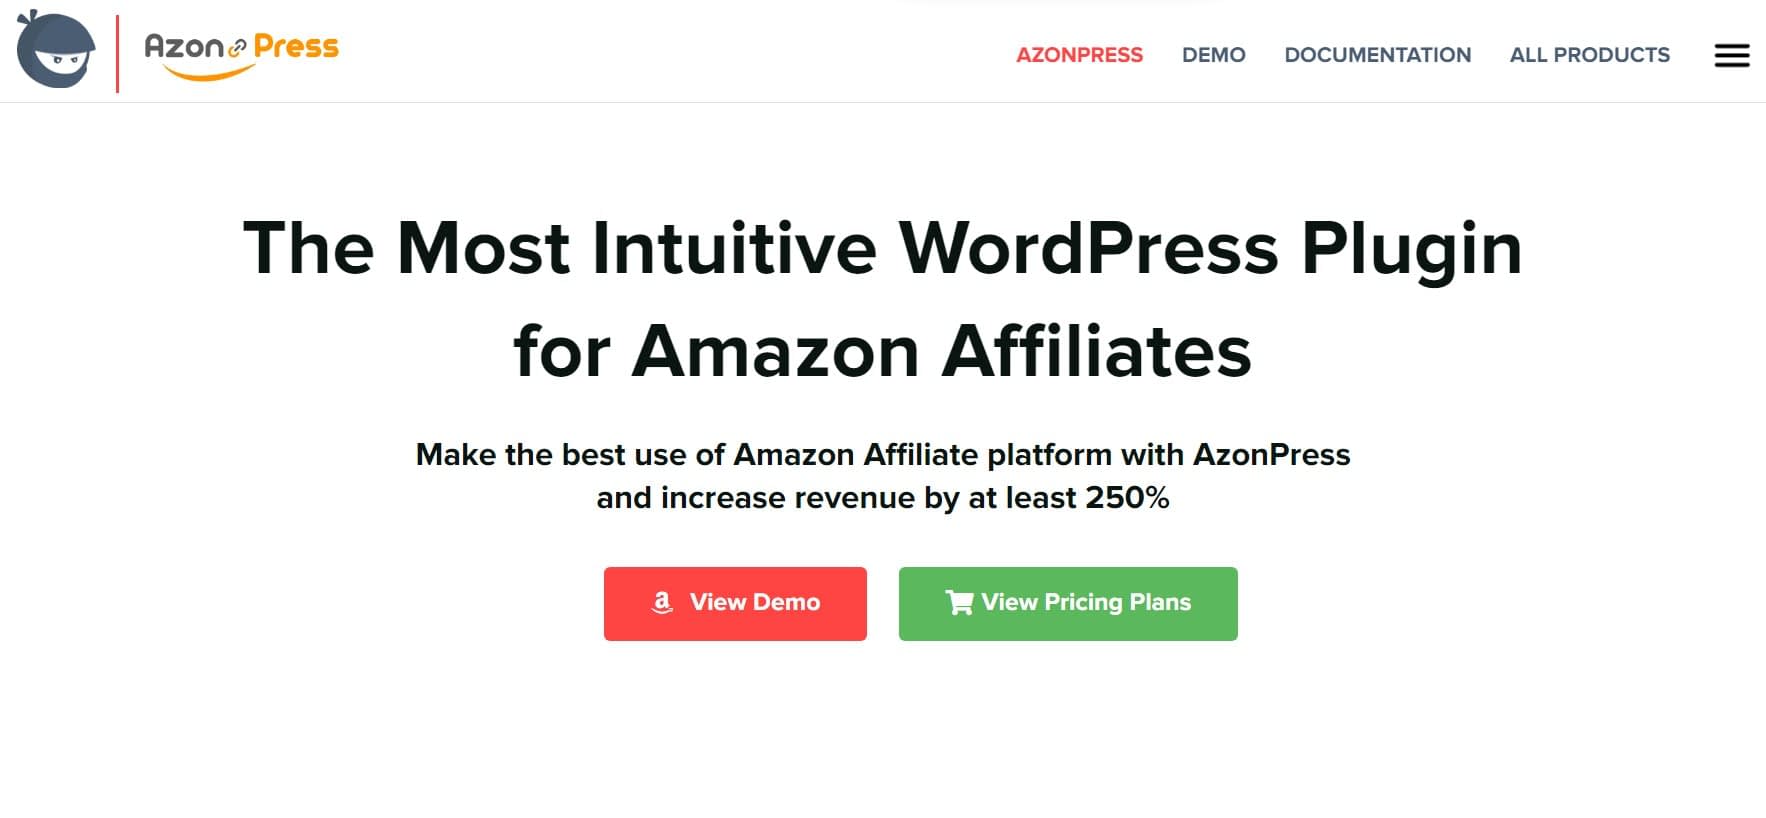 AzonPress is another top option in the WordPress Amazon affiliate plugins space